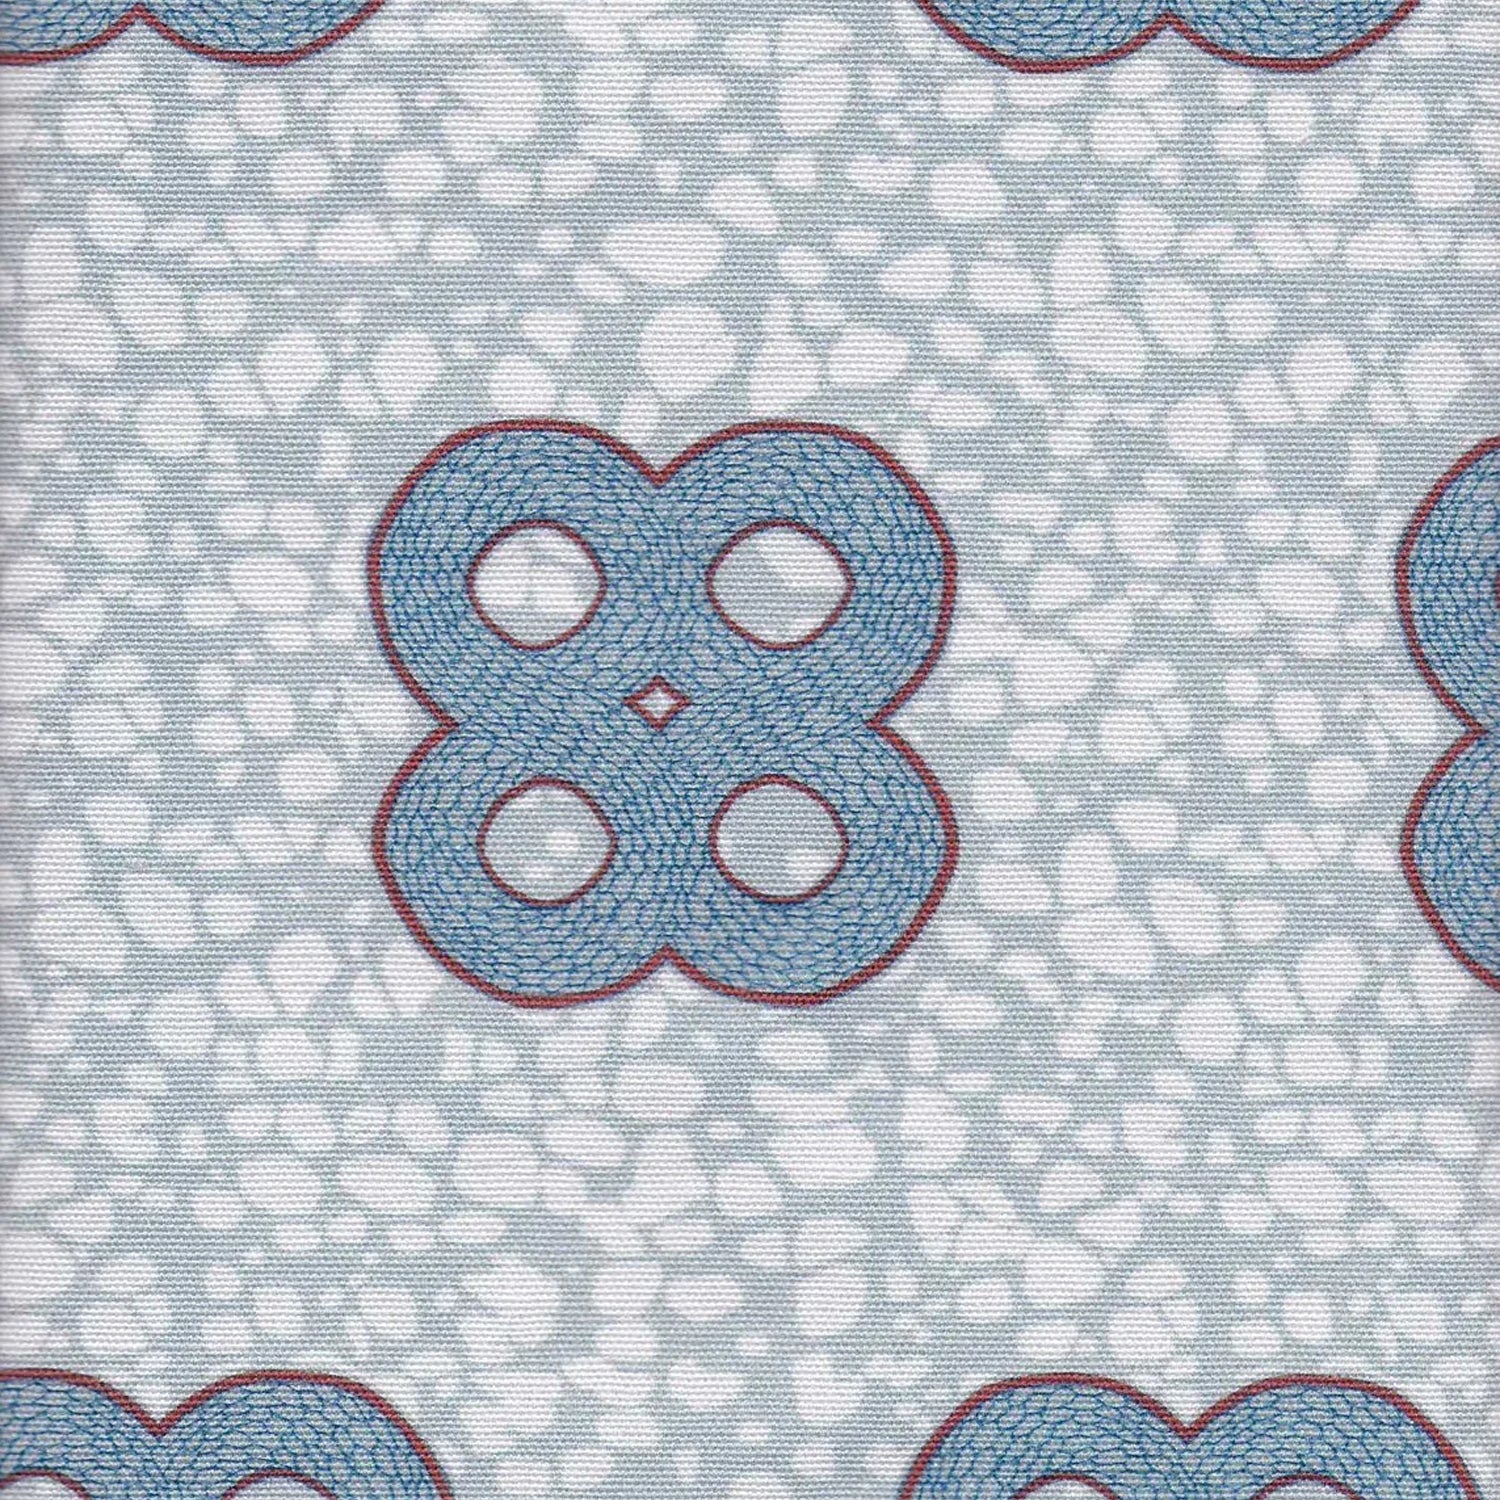 Detail of fabric in a curvilinear print in blue and red on a mottled blue field.